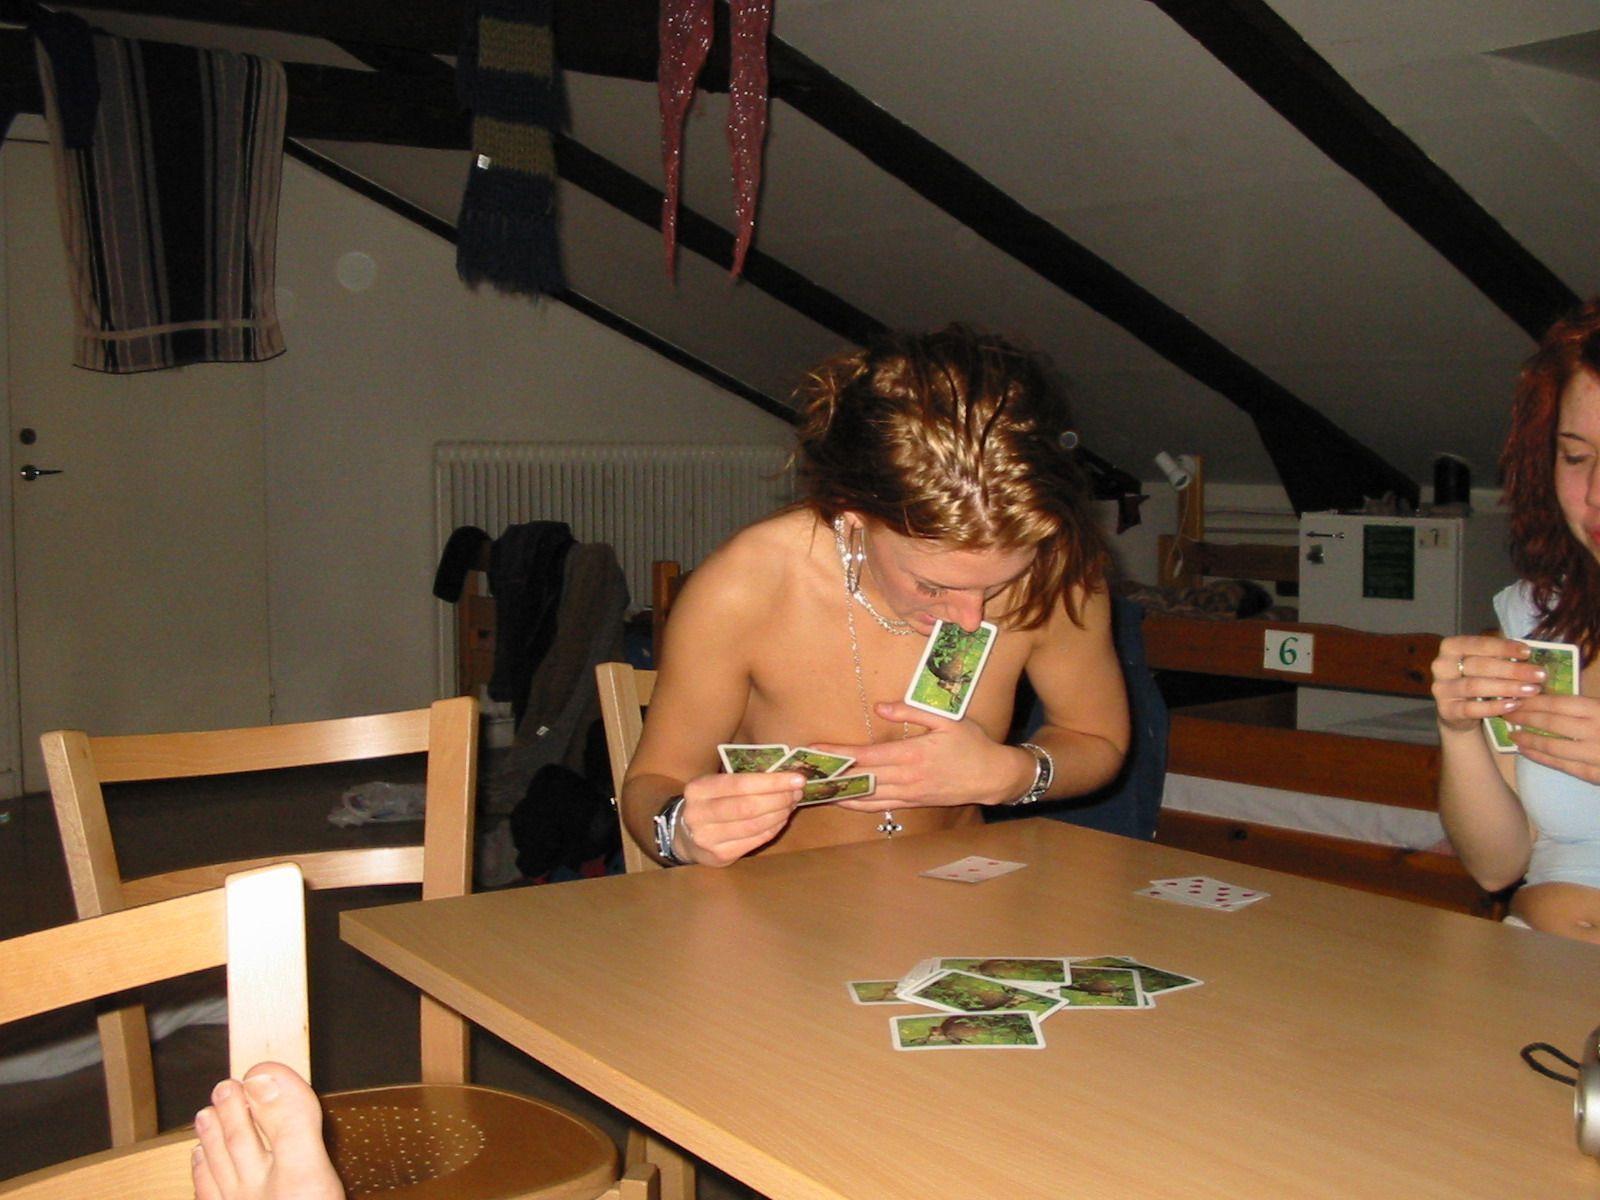 chaw chaw su recommends College Strip Poker Video